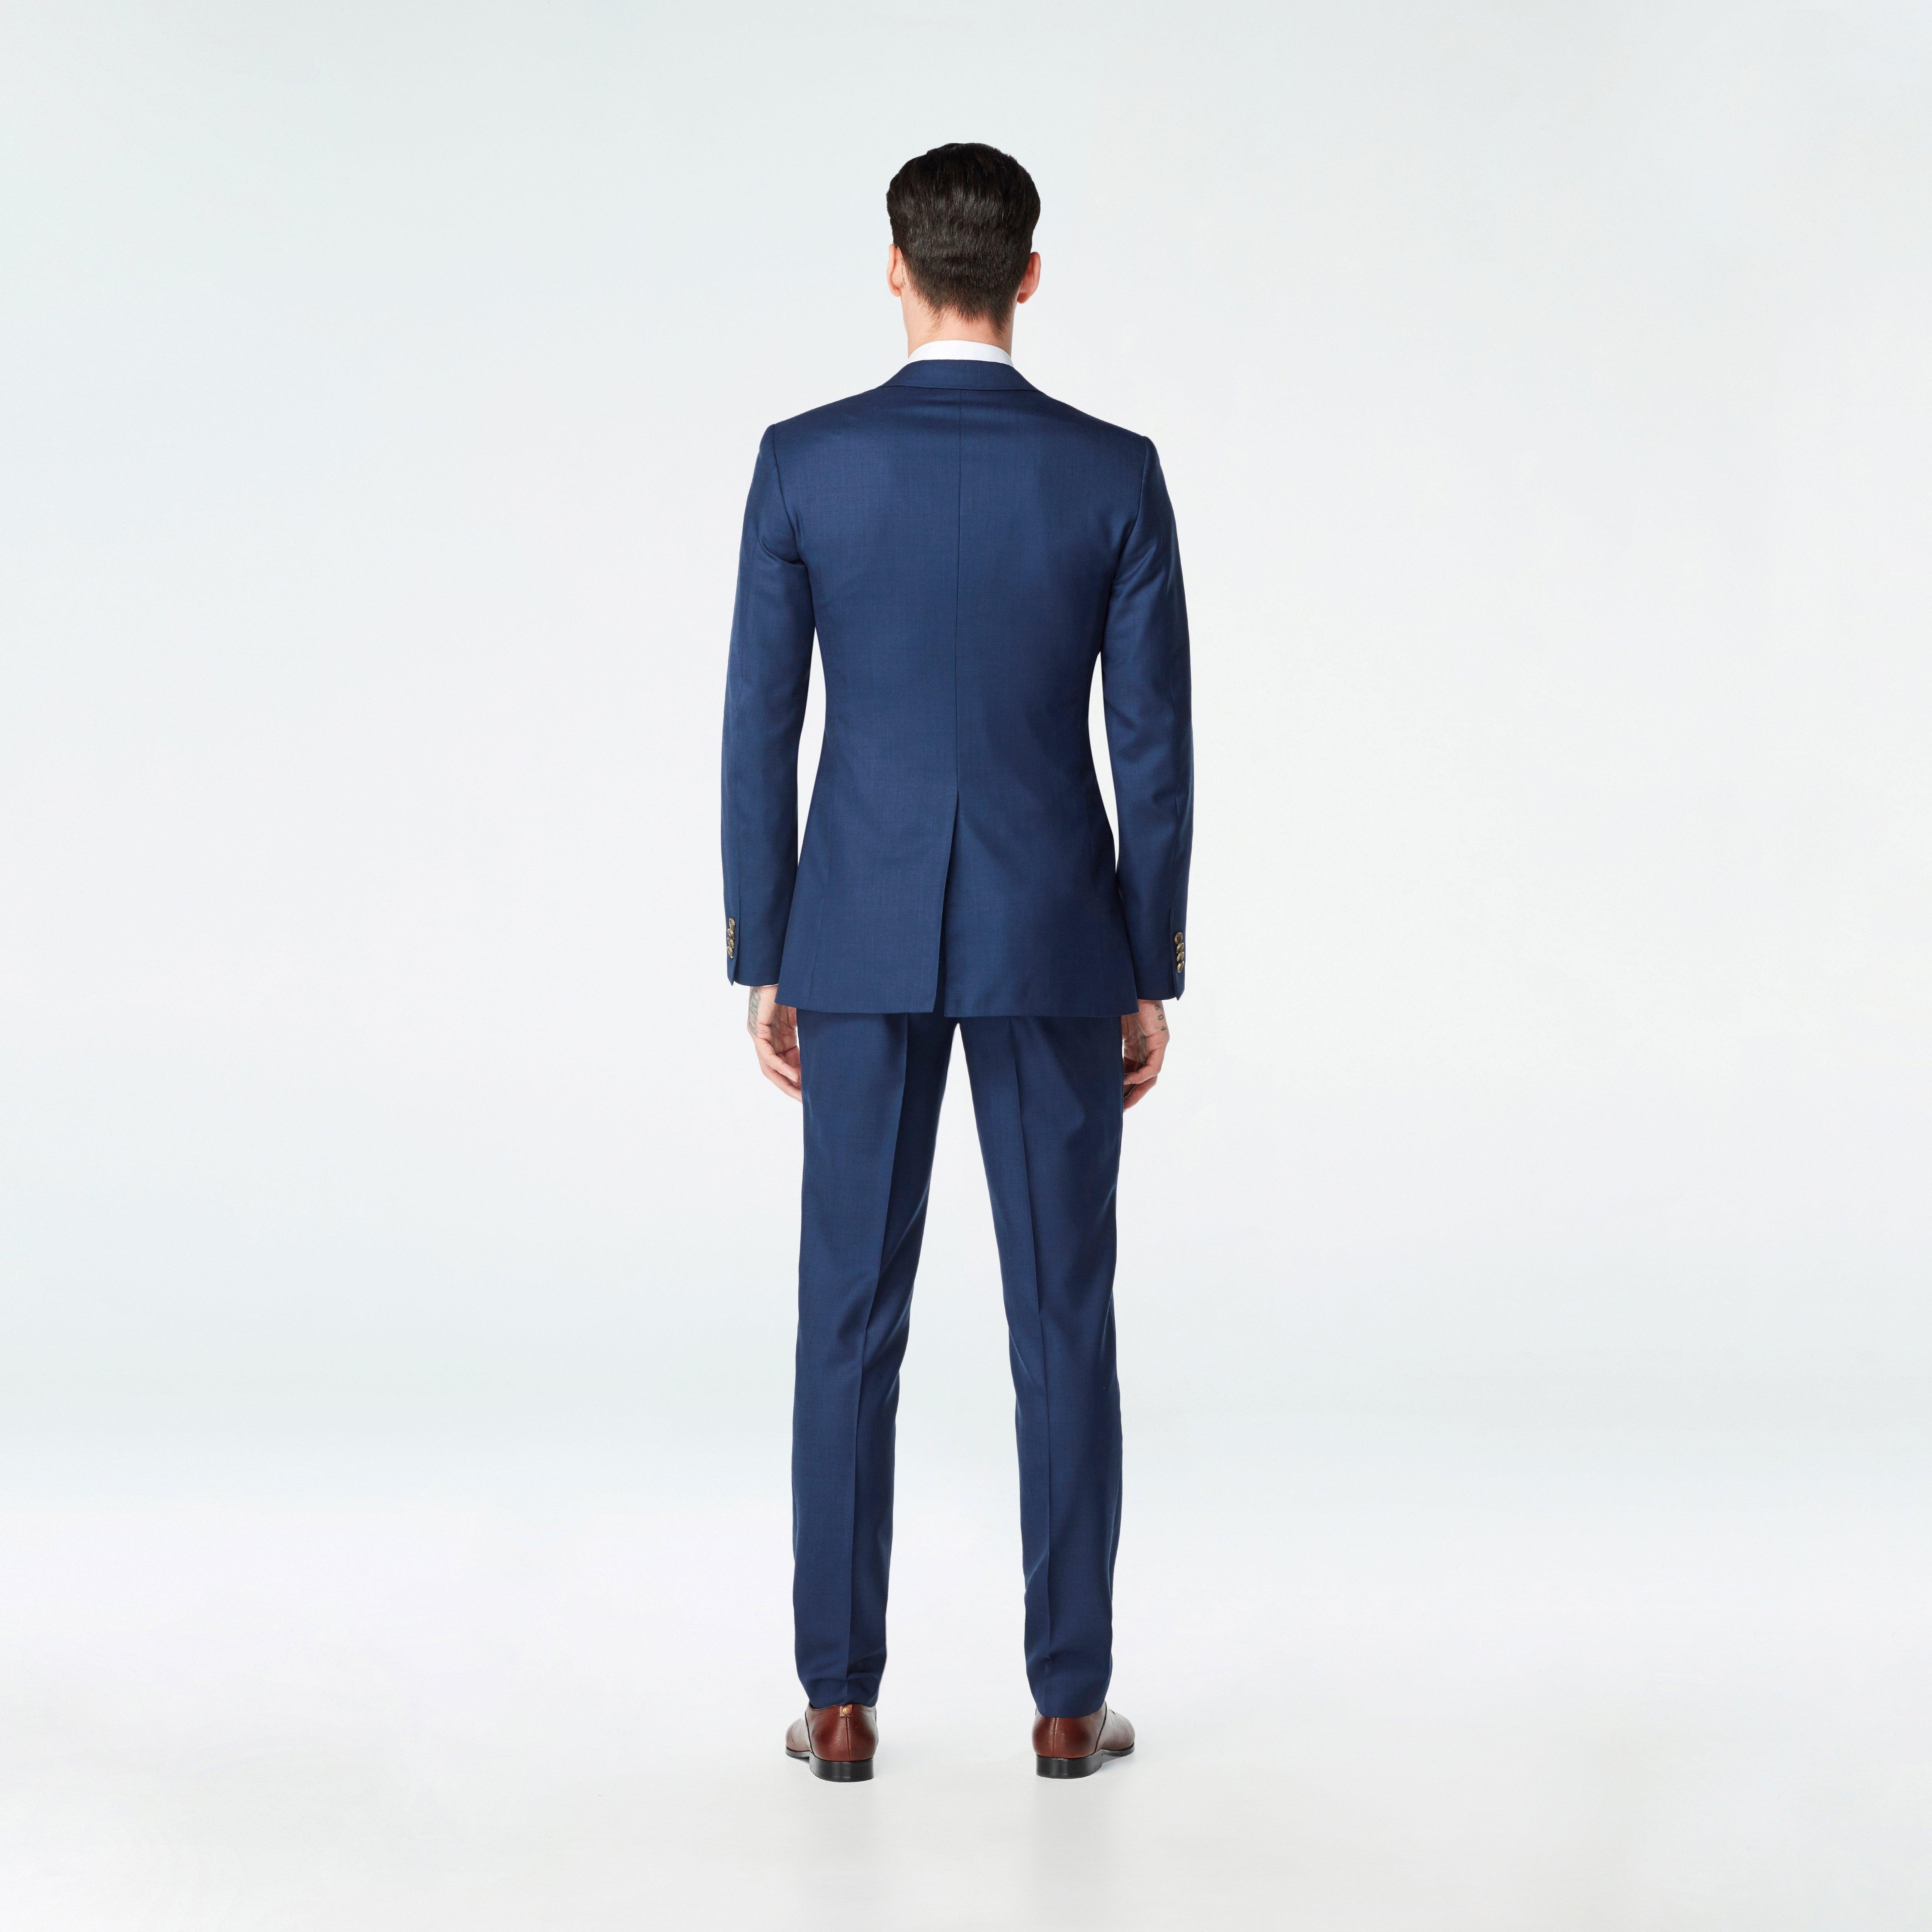 Custom Suits Made For You - Hayle Sharkskin Dark Navy Suit | INDOCHINO